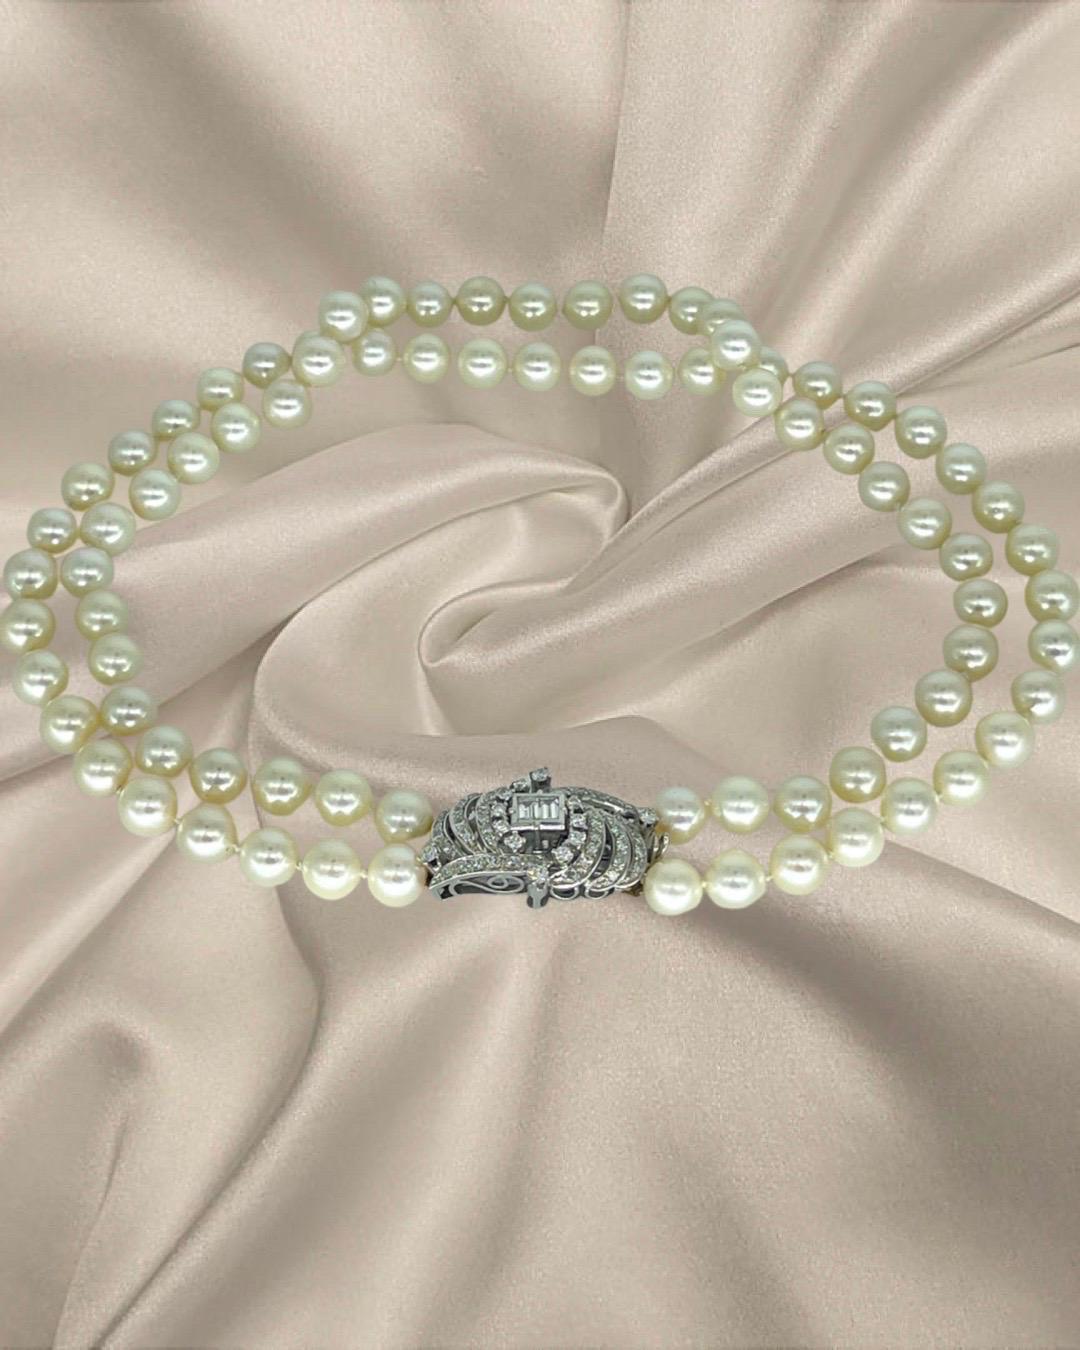 Antique 5.00 Carat Diamonds And Pearls Choker necklace 18k White Gold. Beautiful iconic look very impressive work craftmanship.